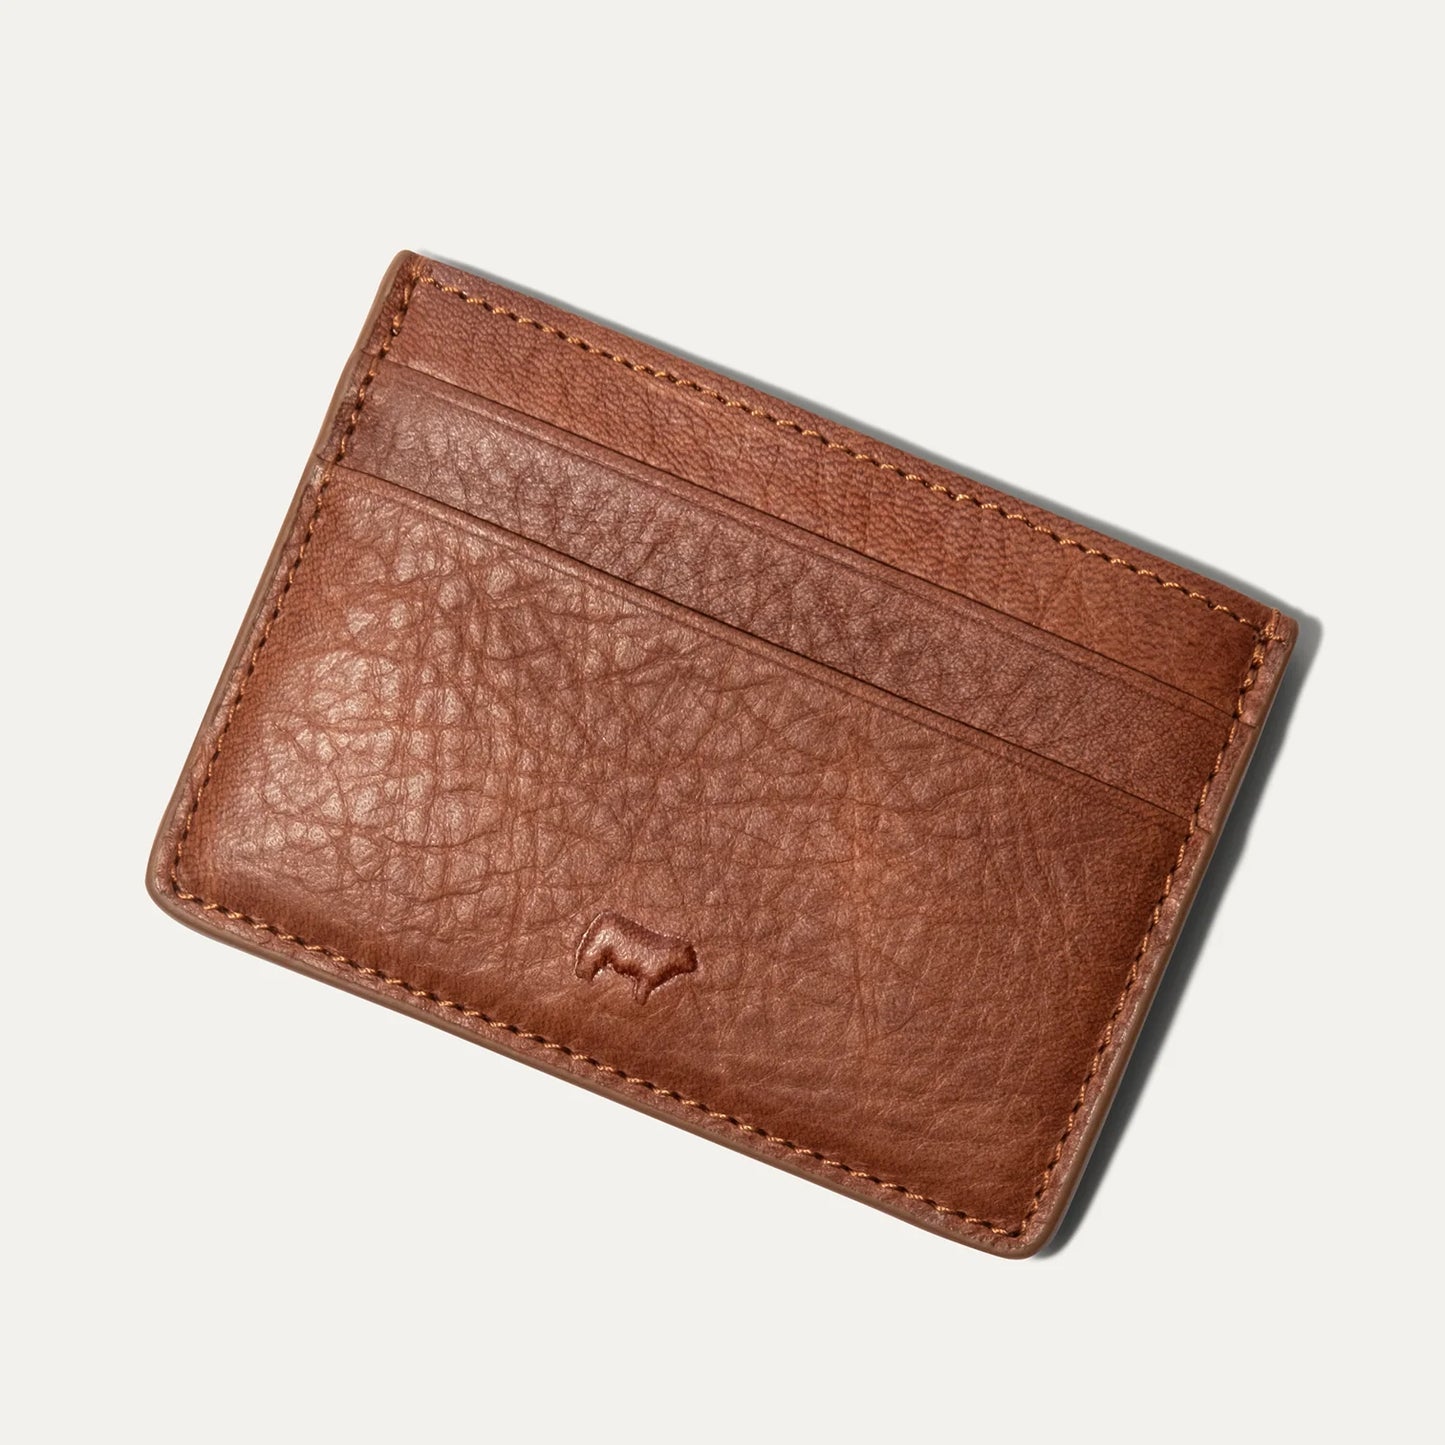 Will Leather Goods Classic Leather Card Case - Tan